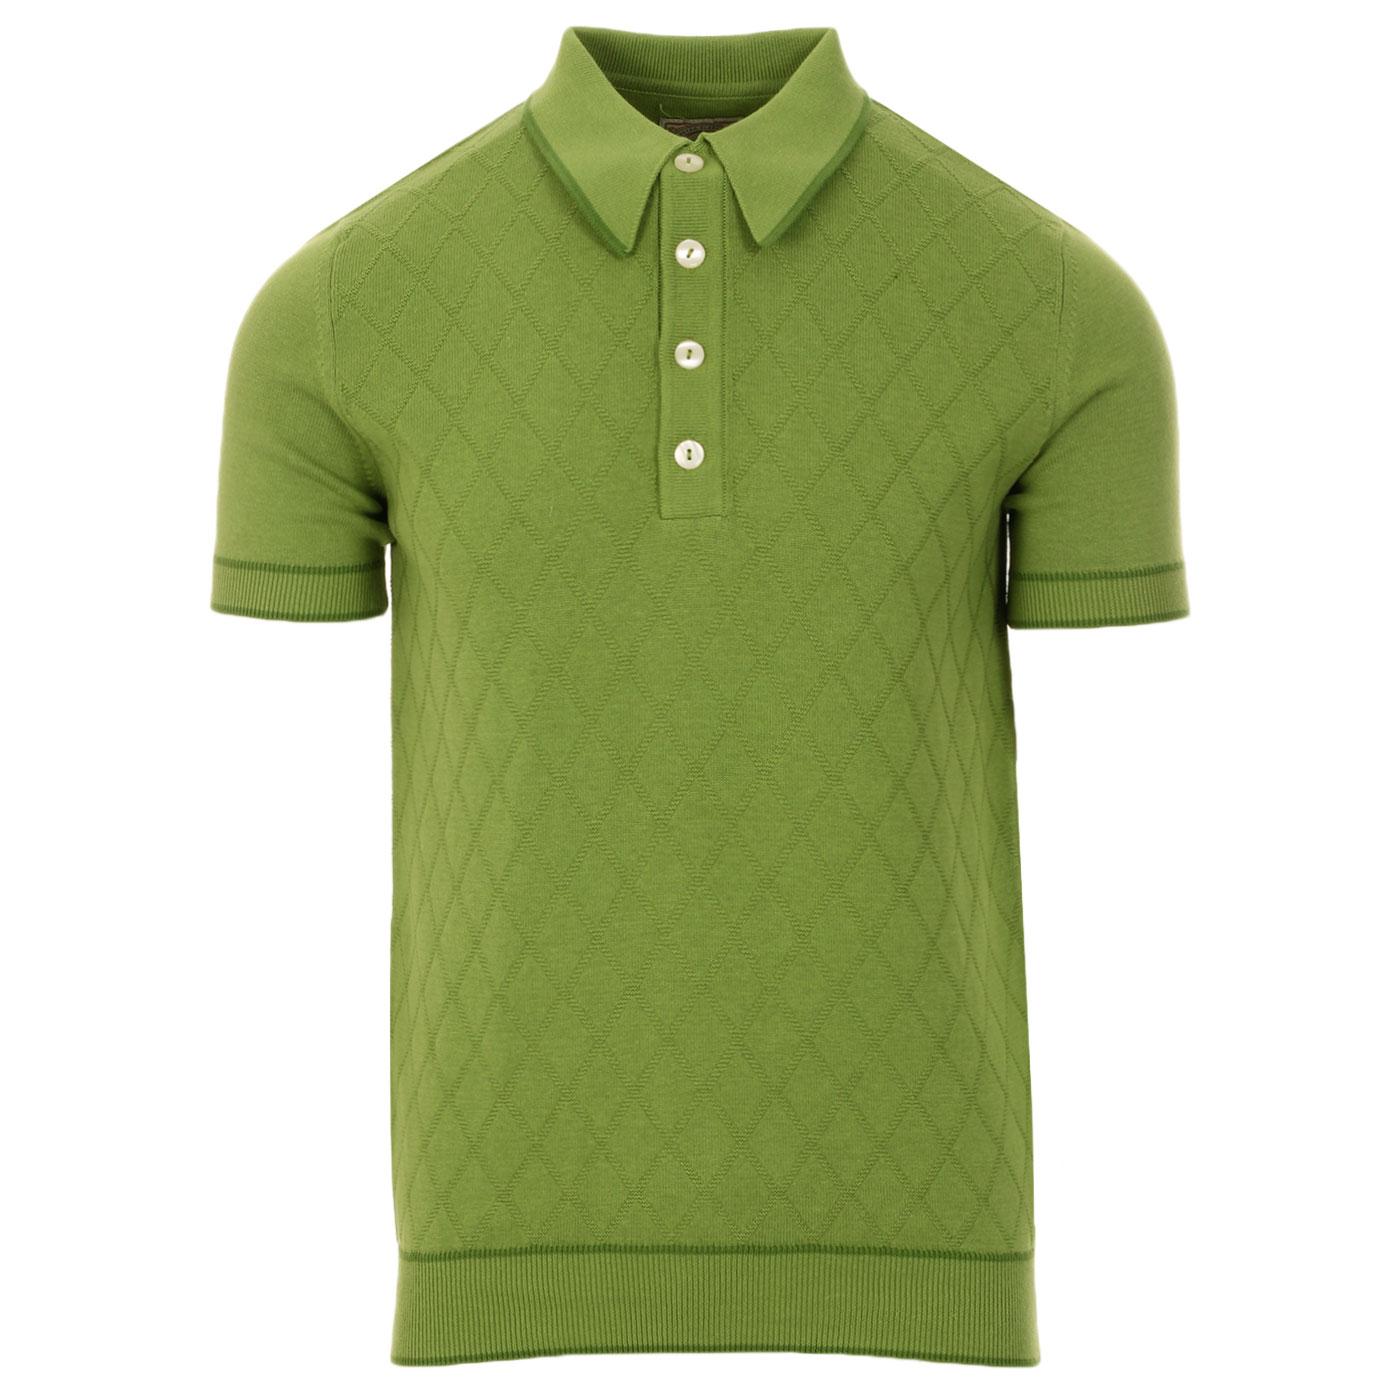 SKA & SOUL Argyle Cable Knit Mod Spear Collar Polo in Green